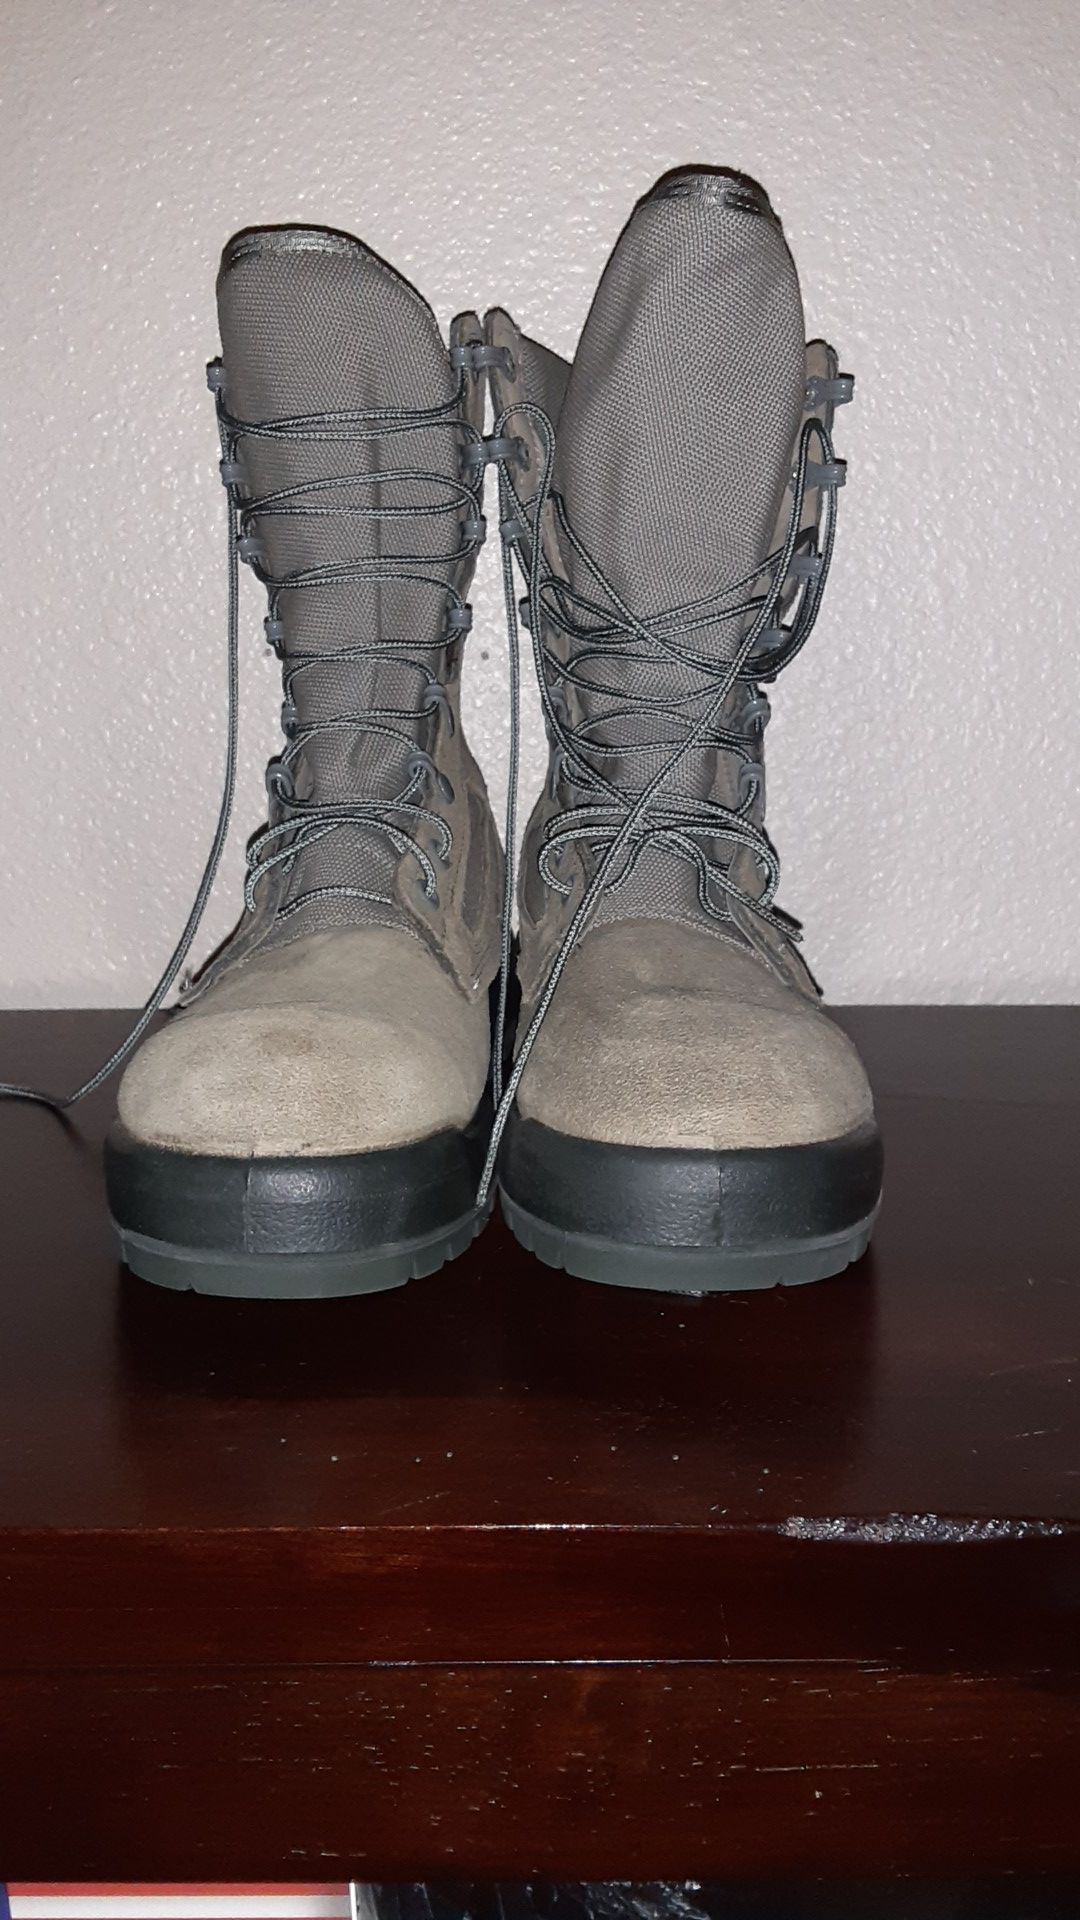 Army work boots